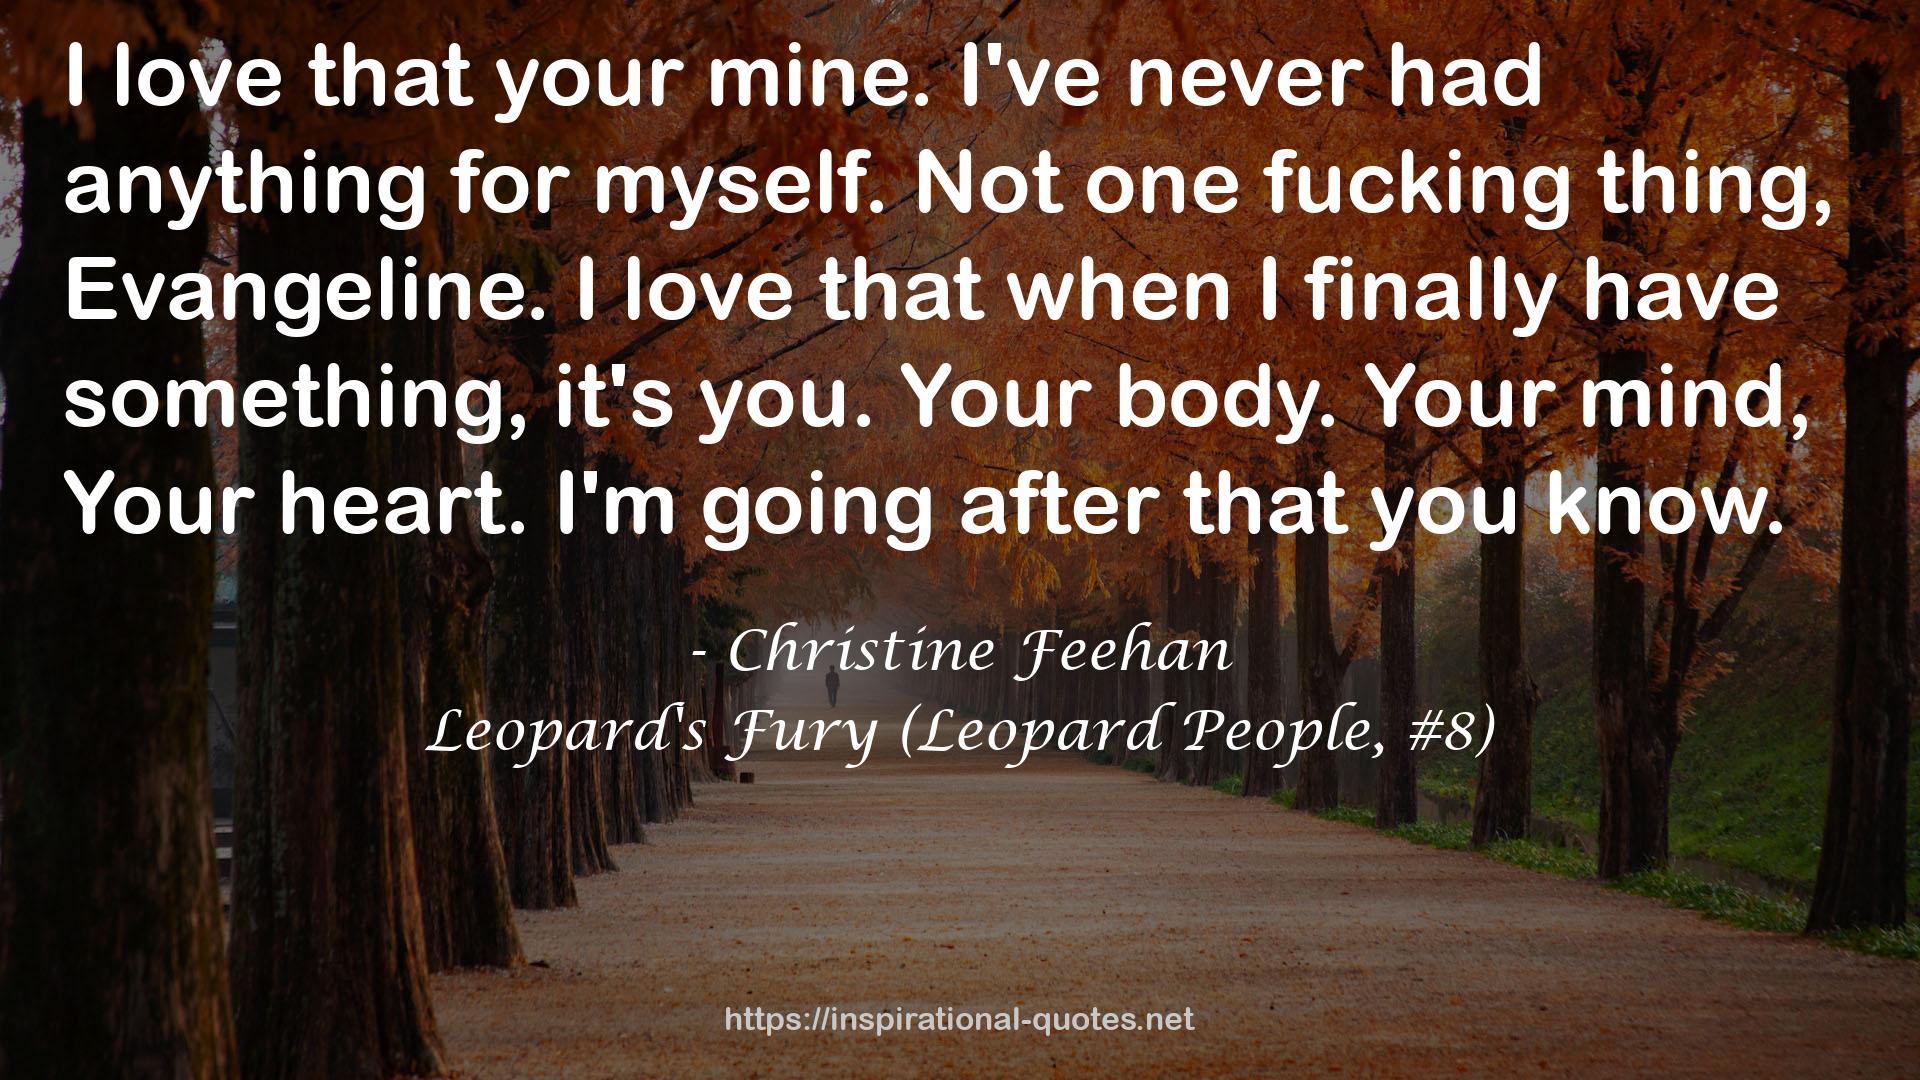 Leopard's Fury (Leopard People, #8) QUOTES